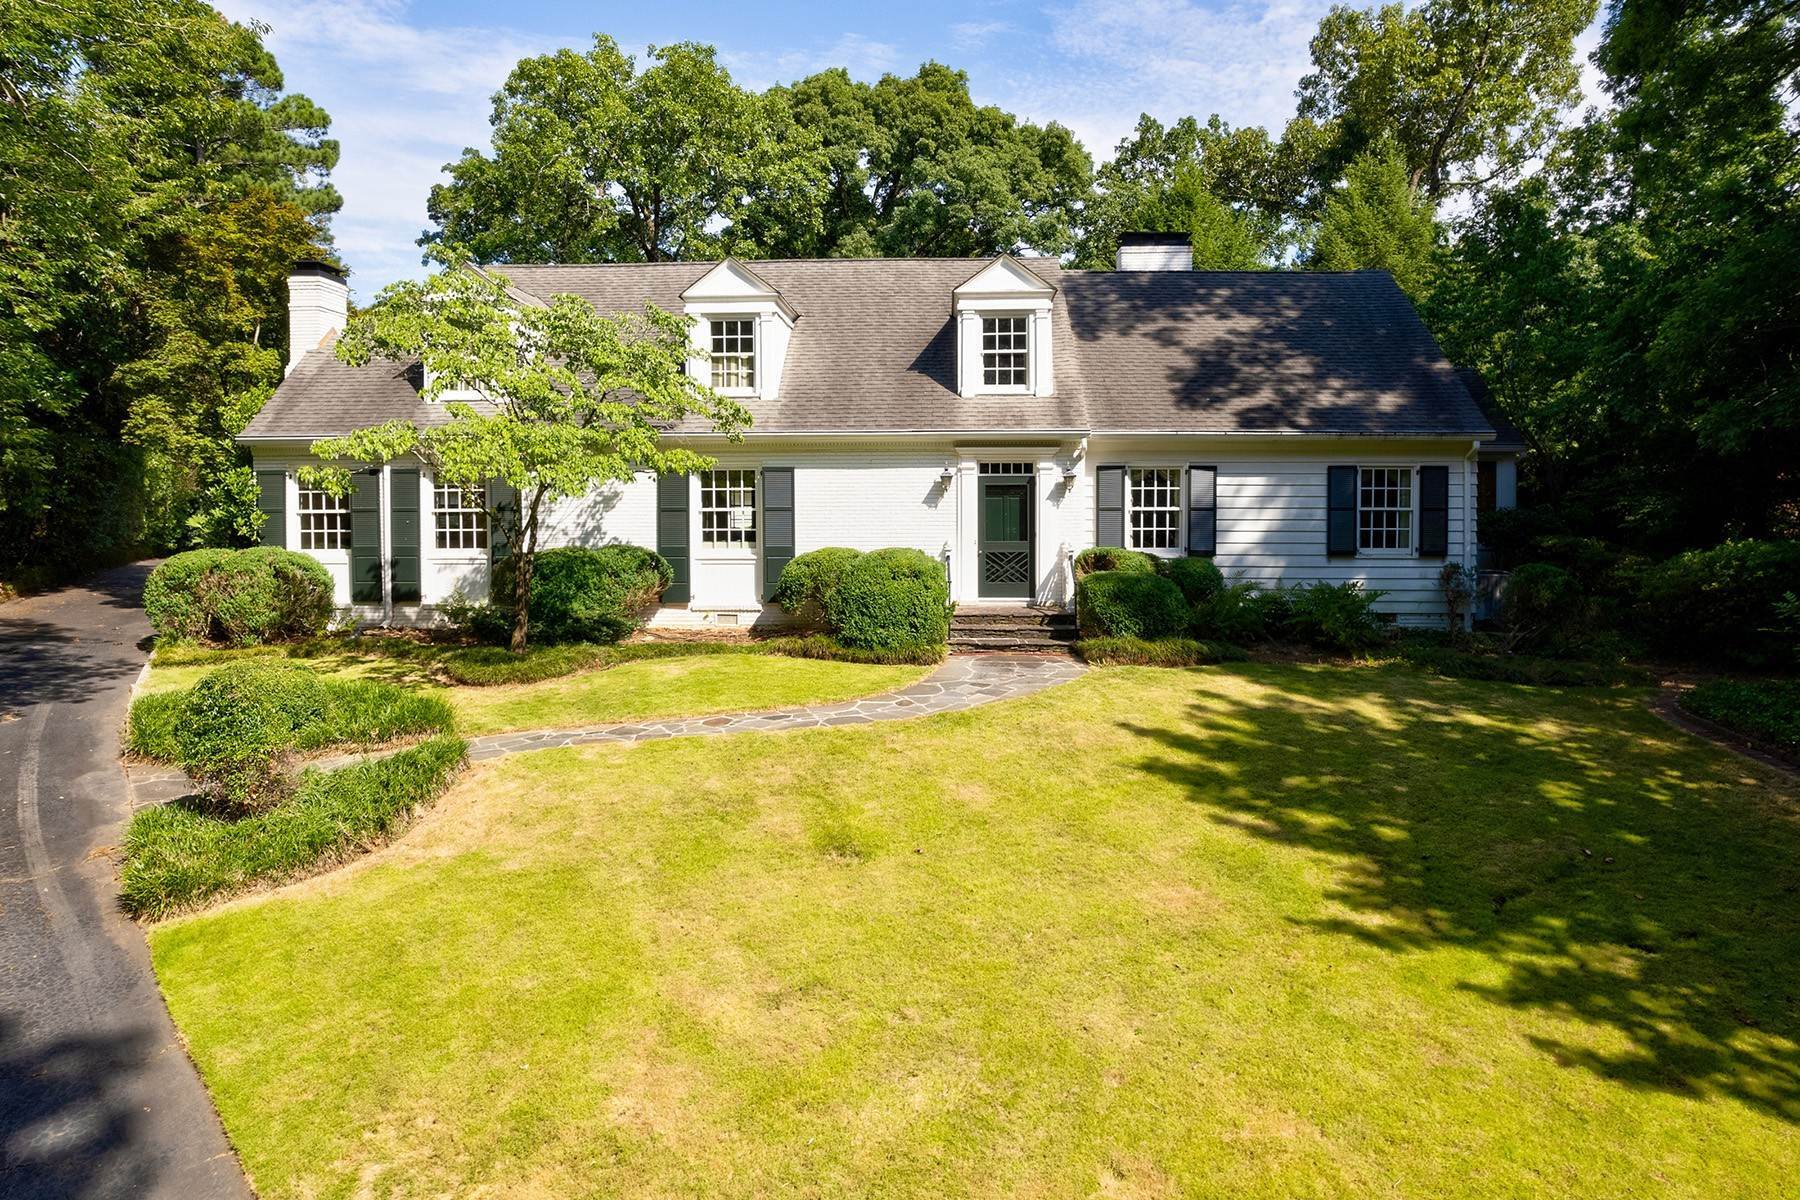 Single Family Homes для того Продажа на Incredible Opportunity to Renovate or Build Dream Home in Tuxedo Park 3511 Woodhaven Road Atlanta, Джорджия 30305 Соединенные Штаты